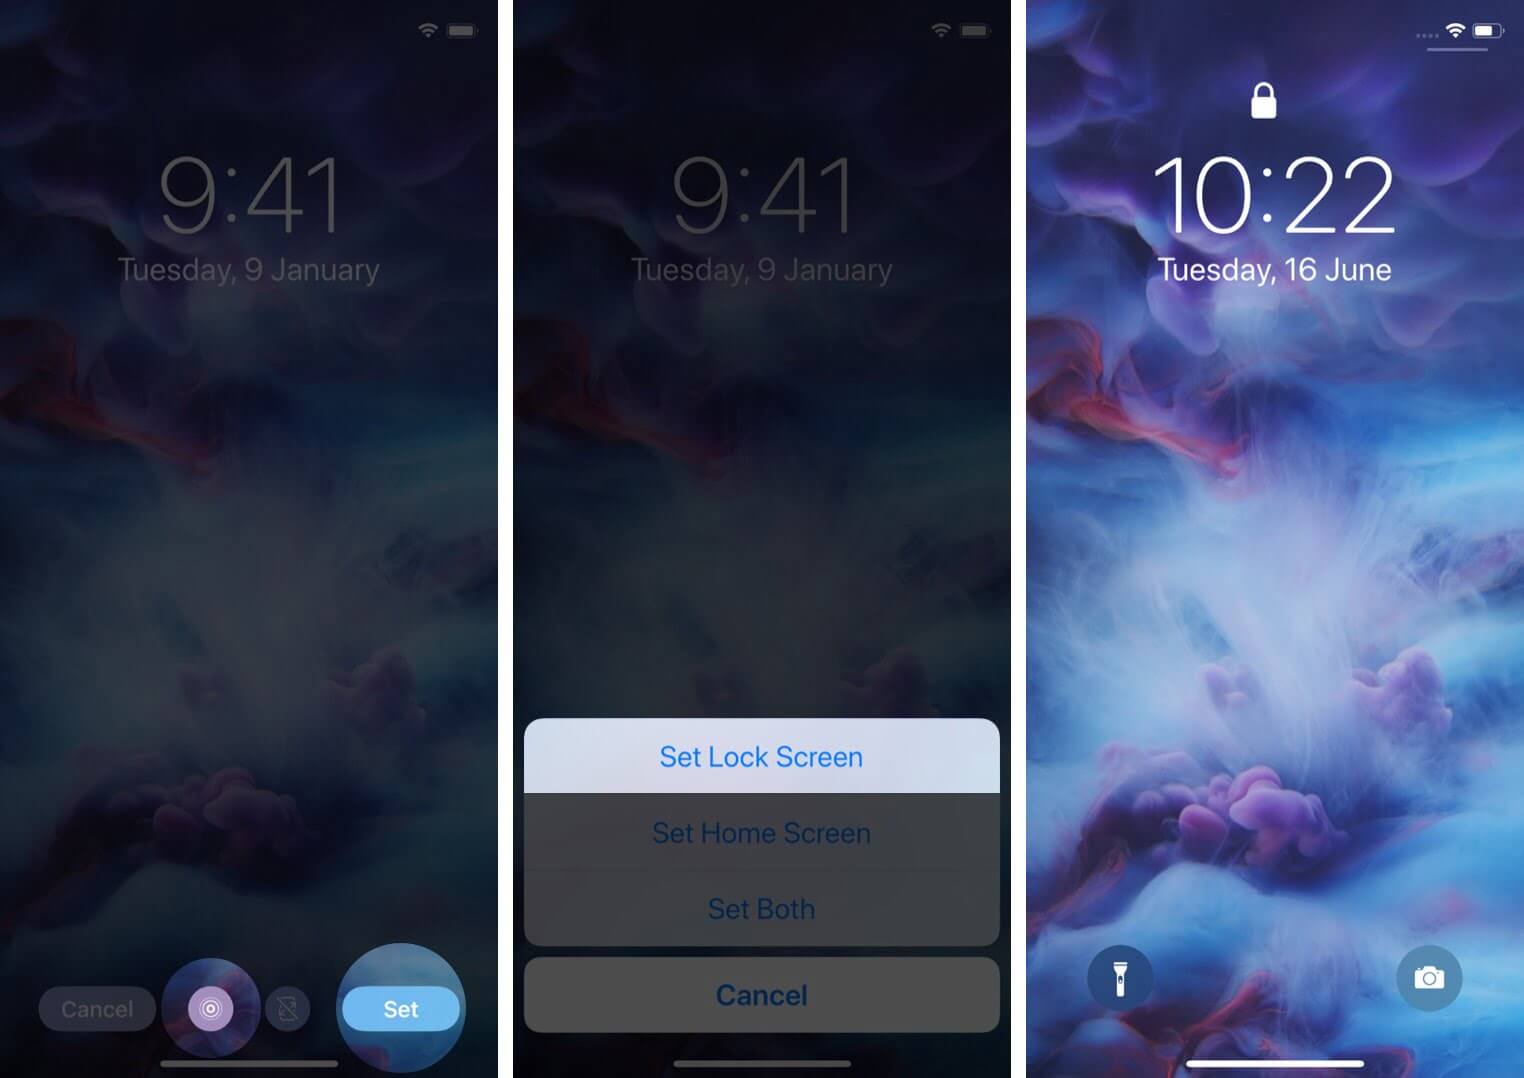 tap on set and select set lock screen to set live wallpaper on iphone